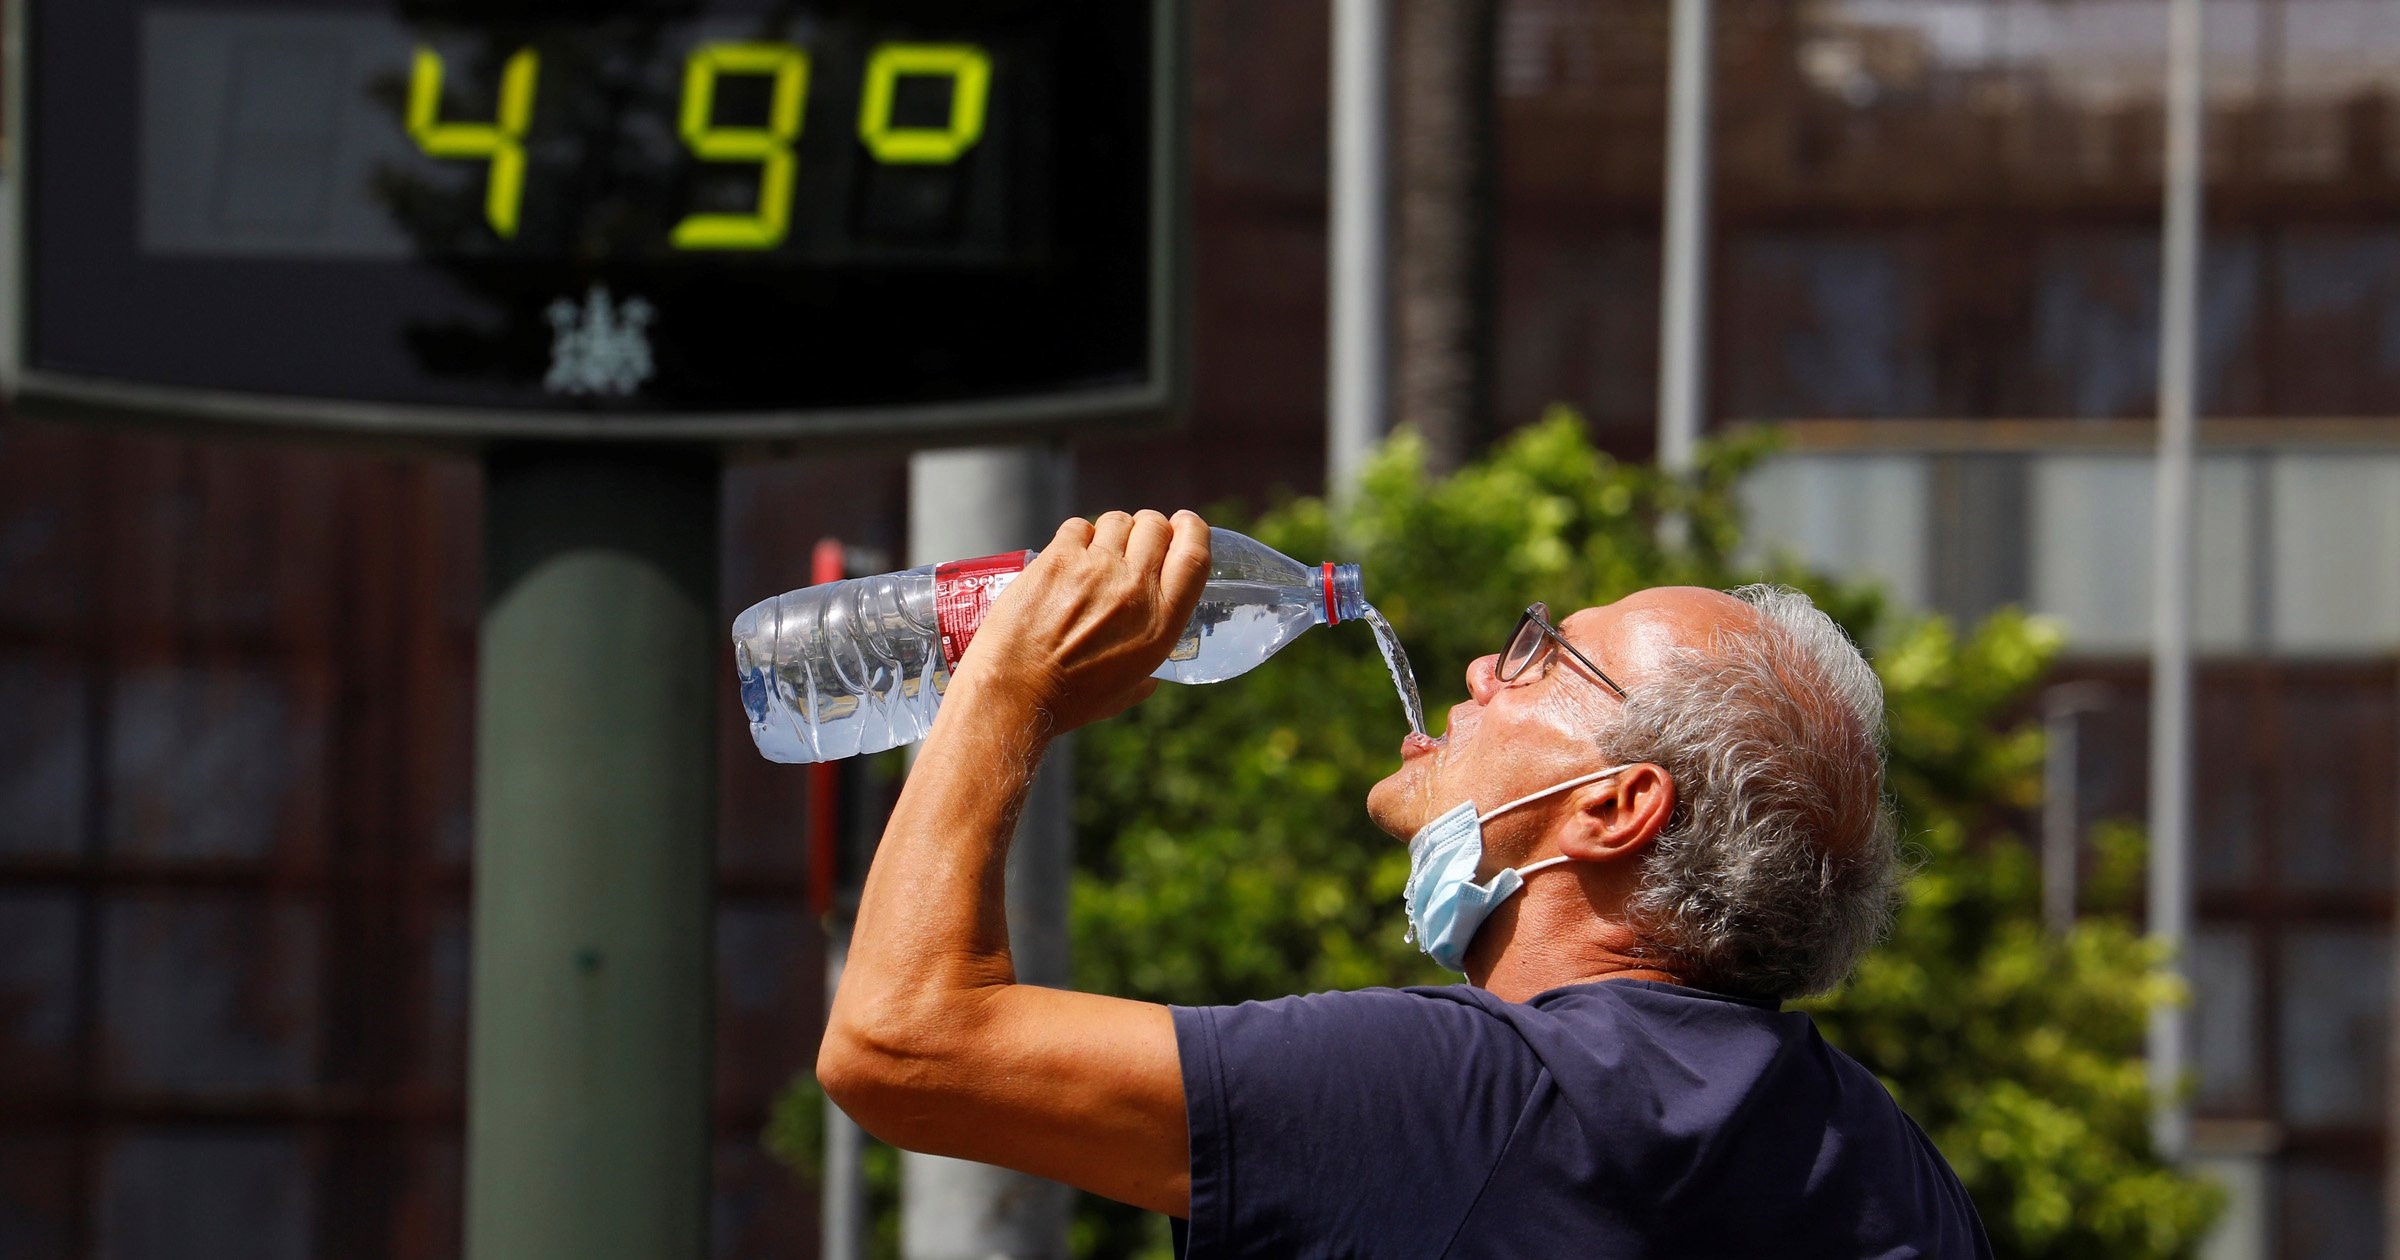 Spain could break it's hottest ever day record as temperatures soar 'frying' holidaymakers